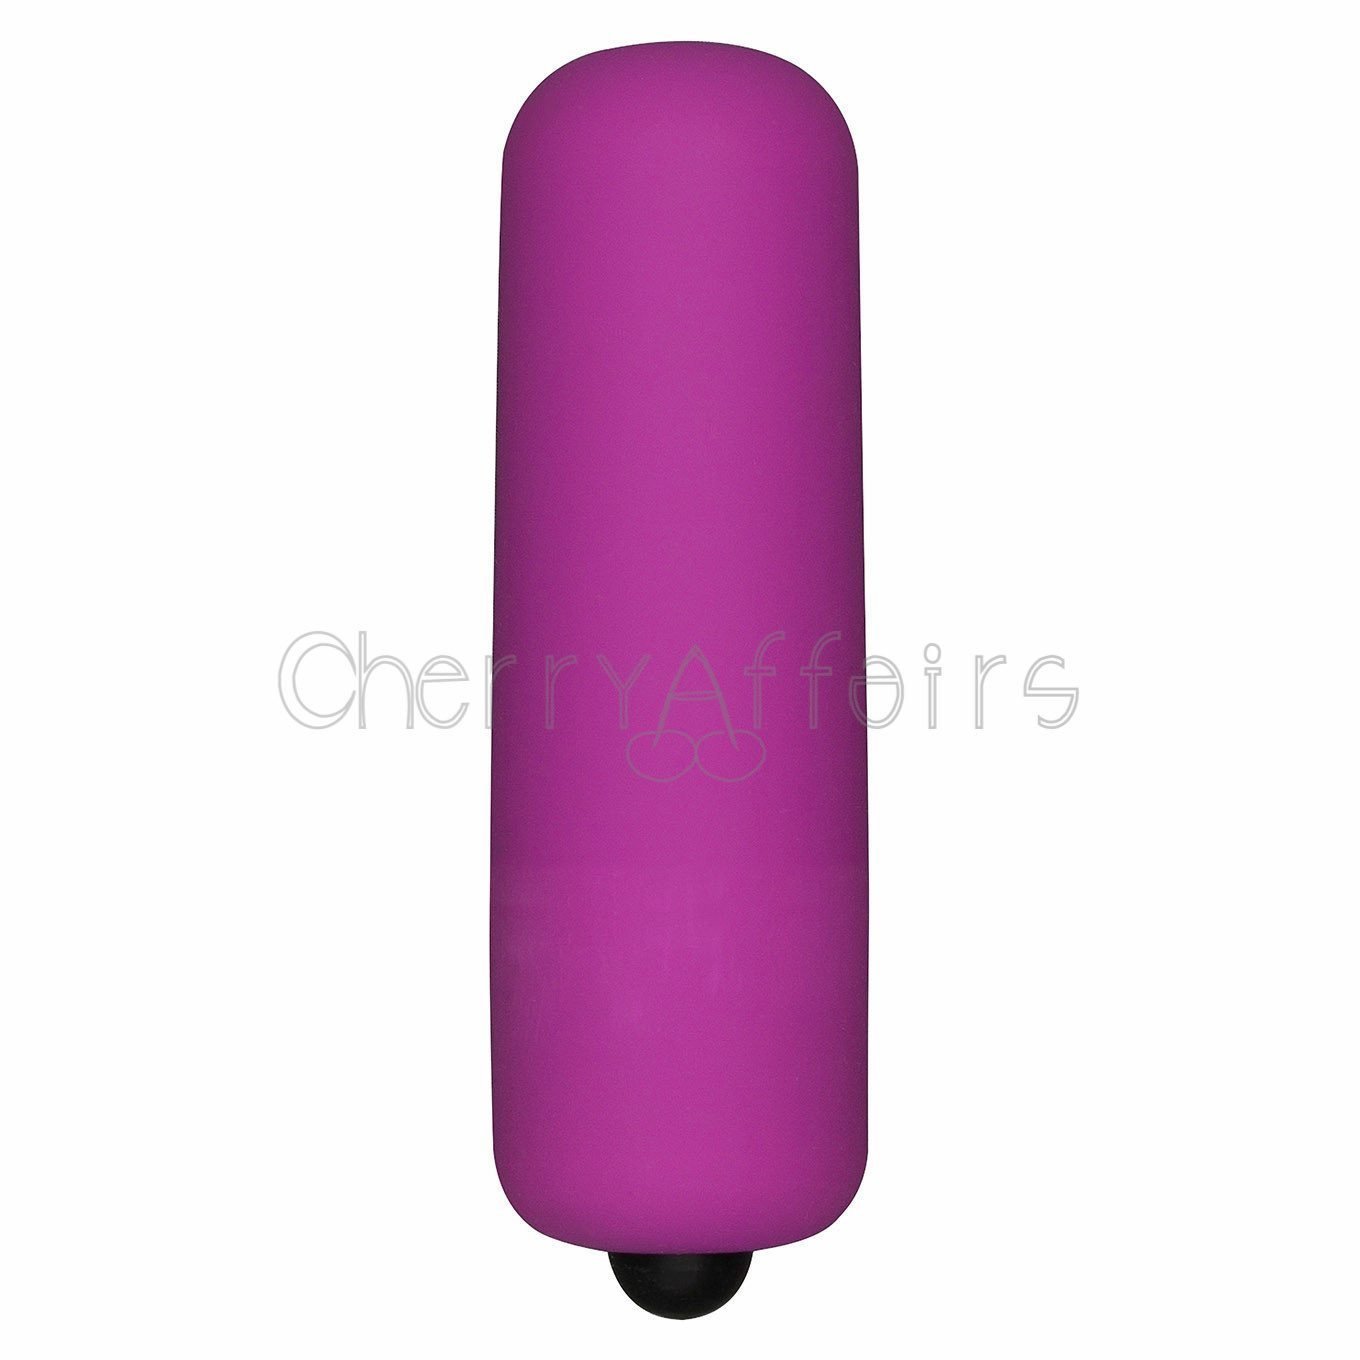 ToyJoy - Funky Bullet (Violet) Bullet (Vibration) Non Rechargeable - CherryAffairs Singapore